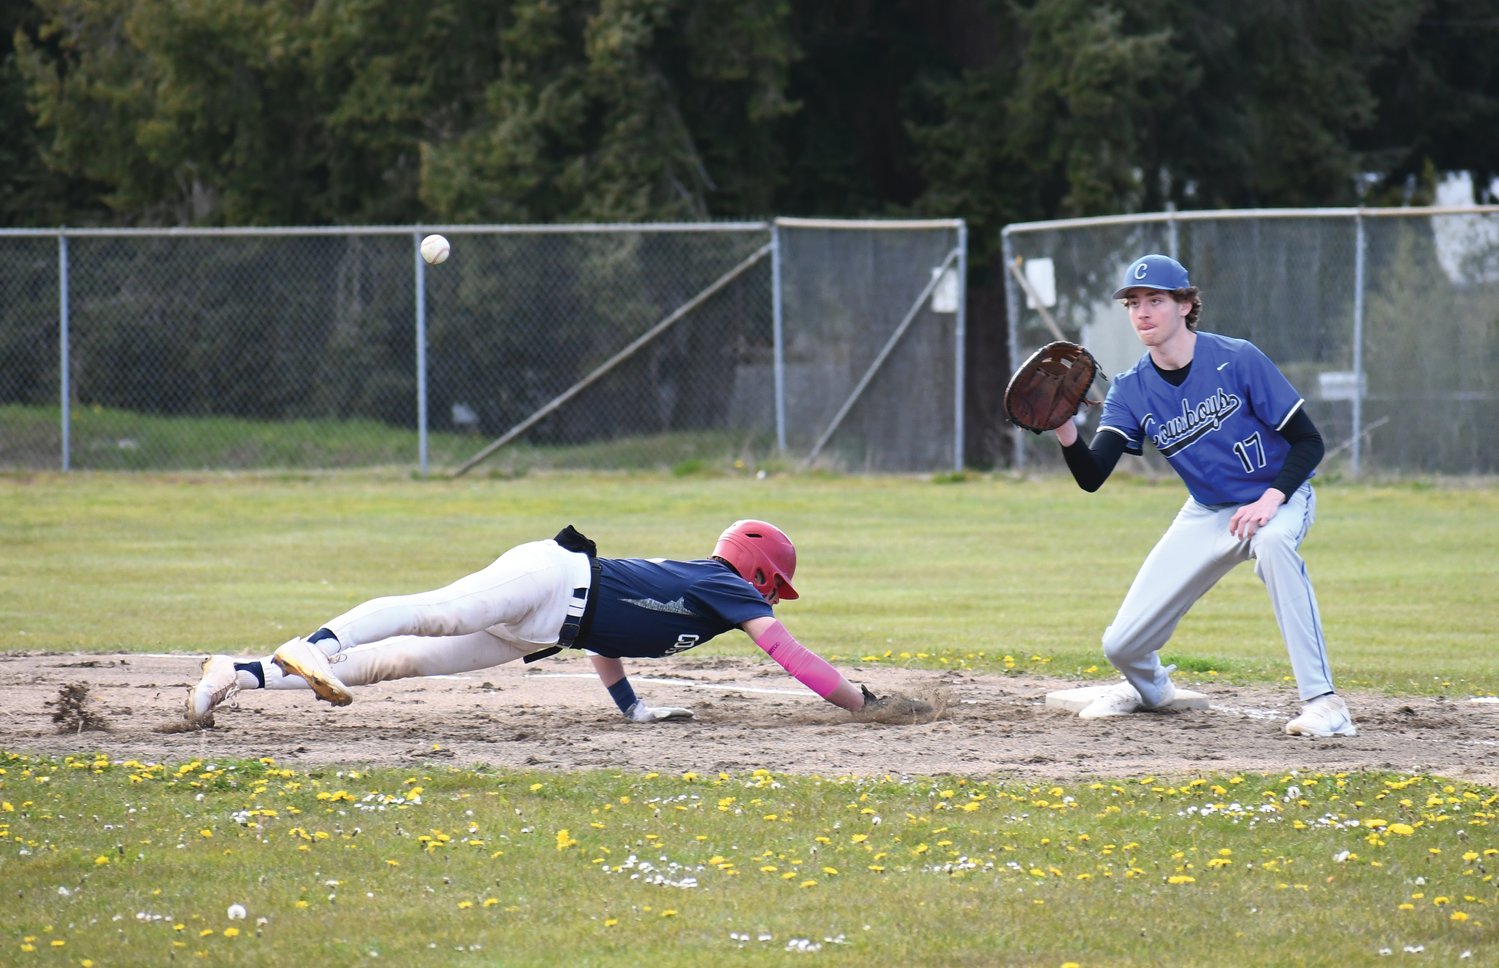 Rivals first baseman Owen Thornton prepares to catch the ball in an attempt to tag out a Cougar runner in the first game against Cascade Christian.